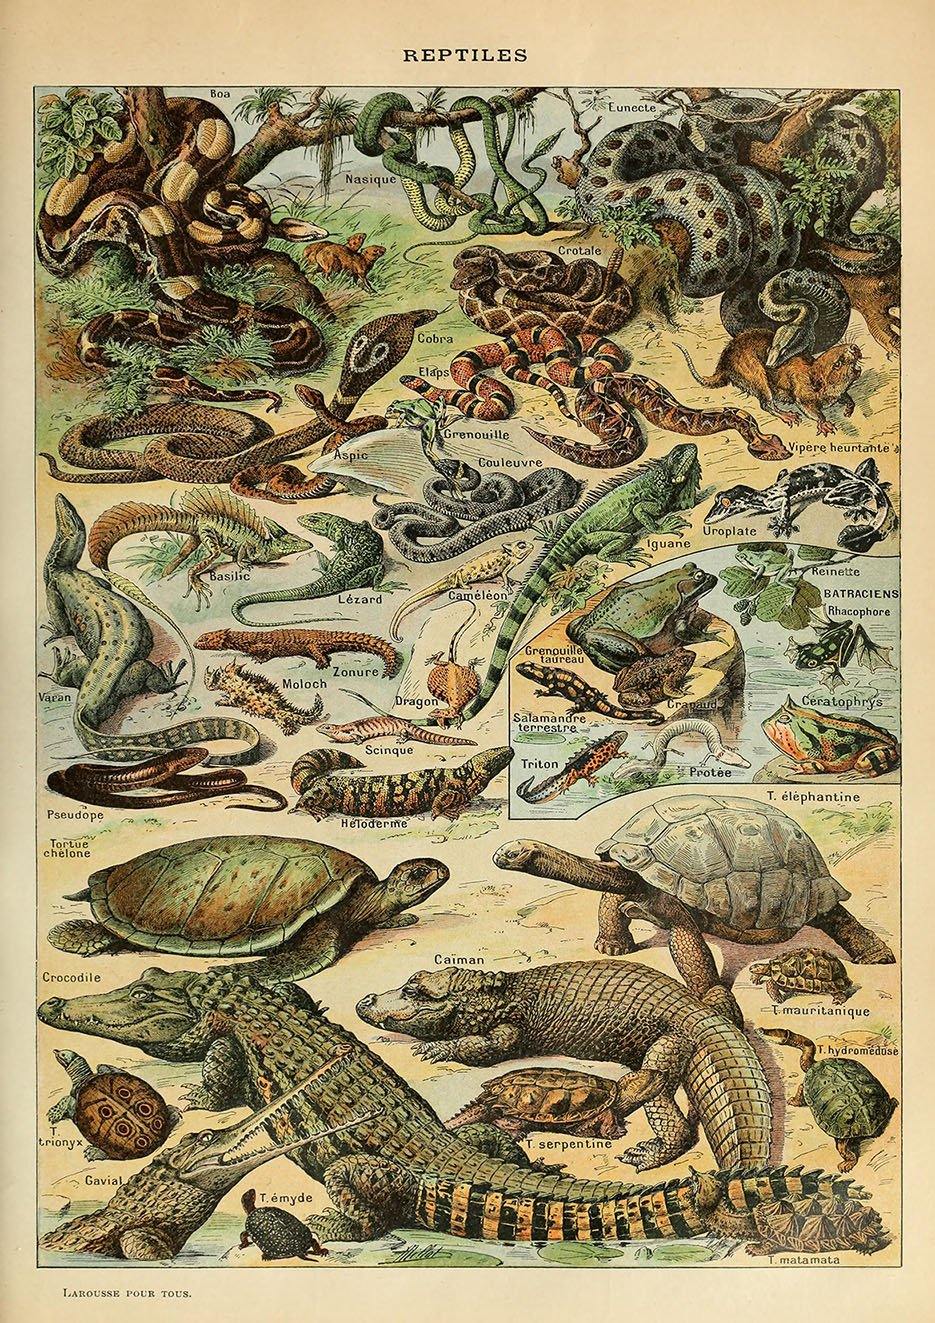 VINTAGE REPTILES POSTER: French Art Print With Crocodile, Snakes - Pimlico Prints